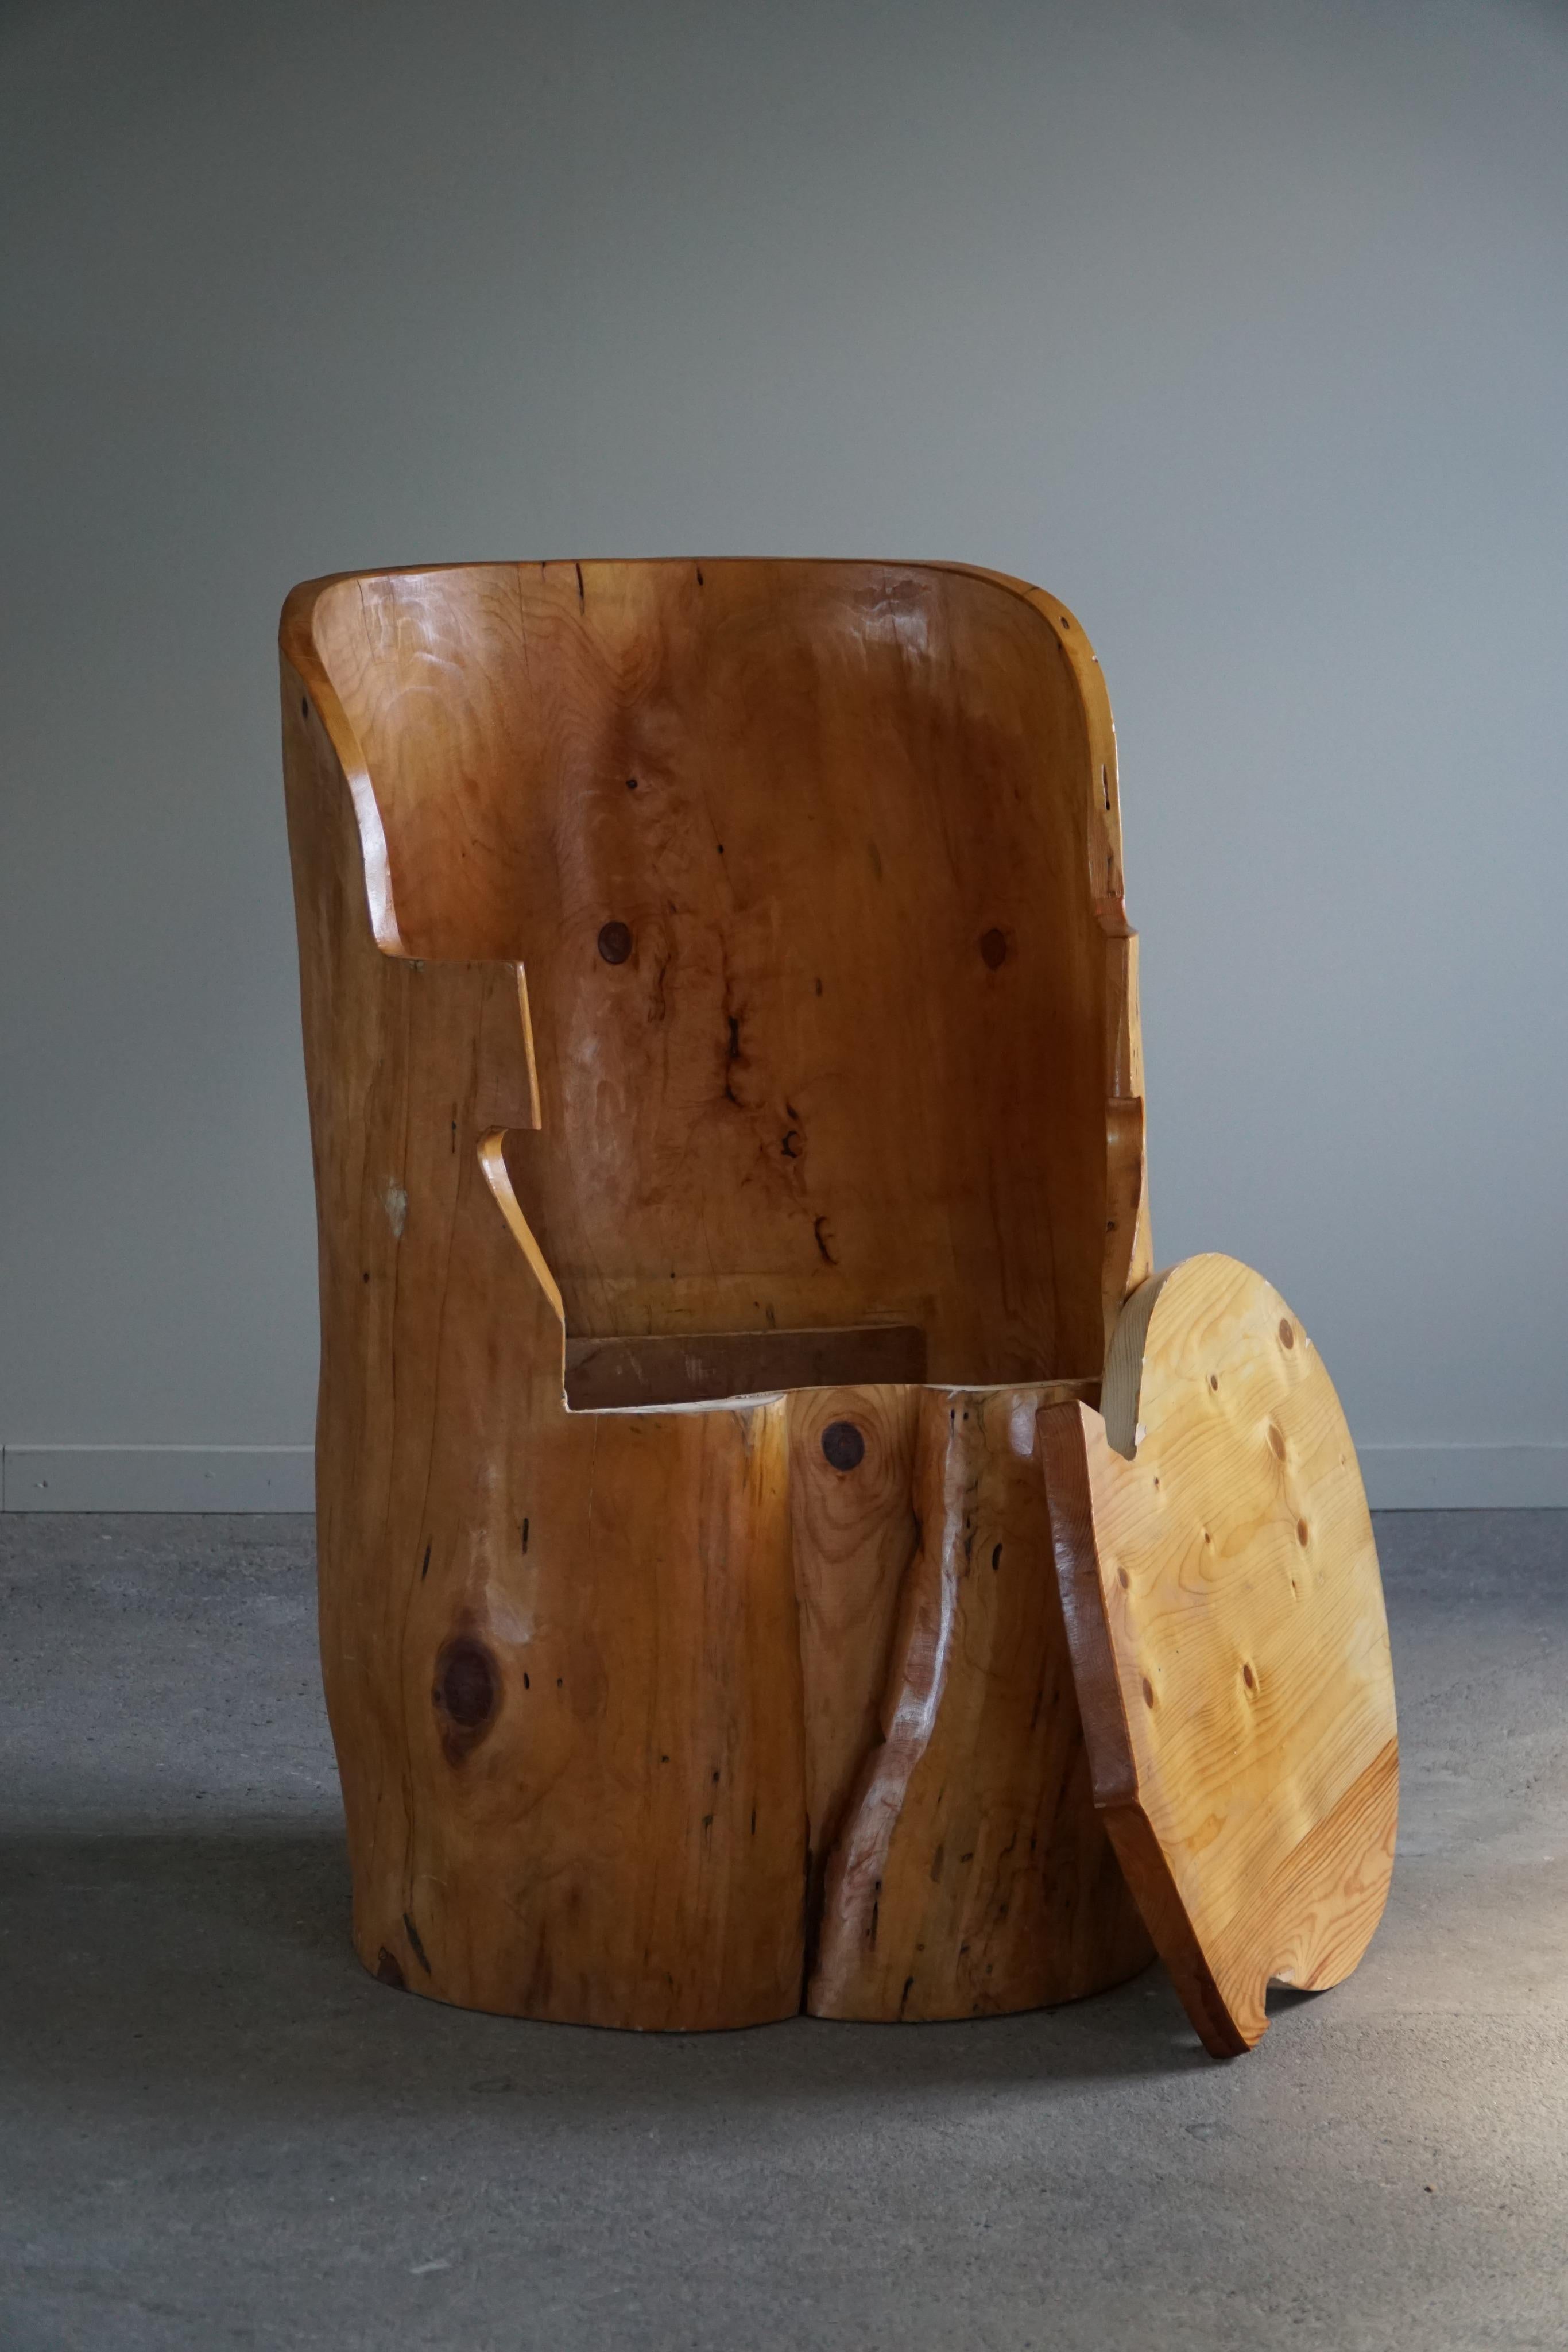 Stump Chair in Solid Birch by a Swedish Cabinetmaker, Wabi Sabi, 1950s For Sale 8